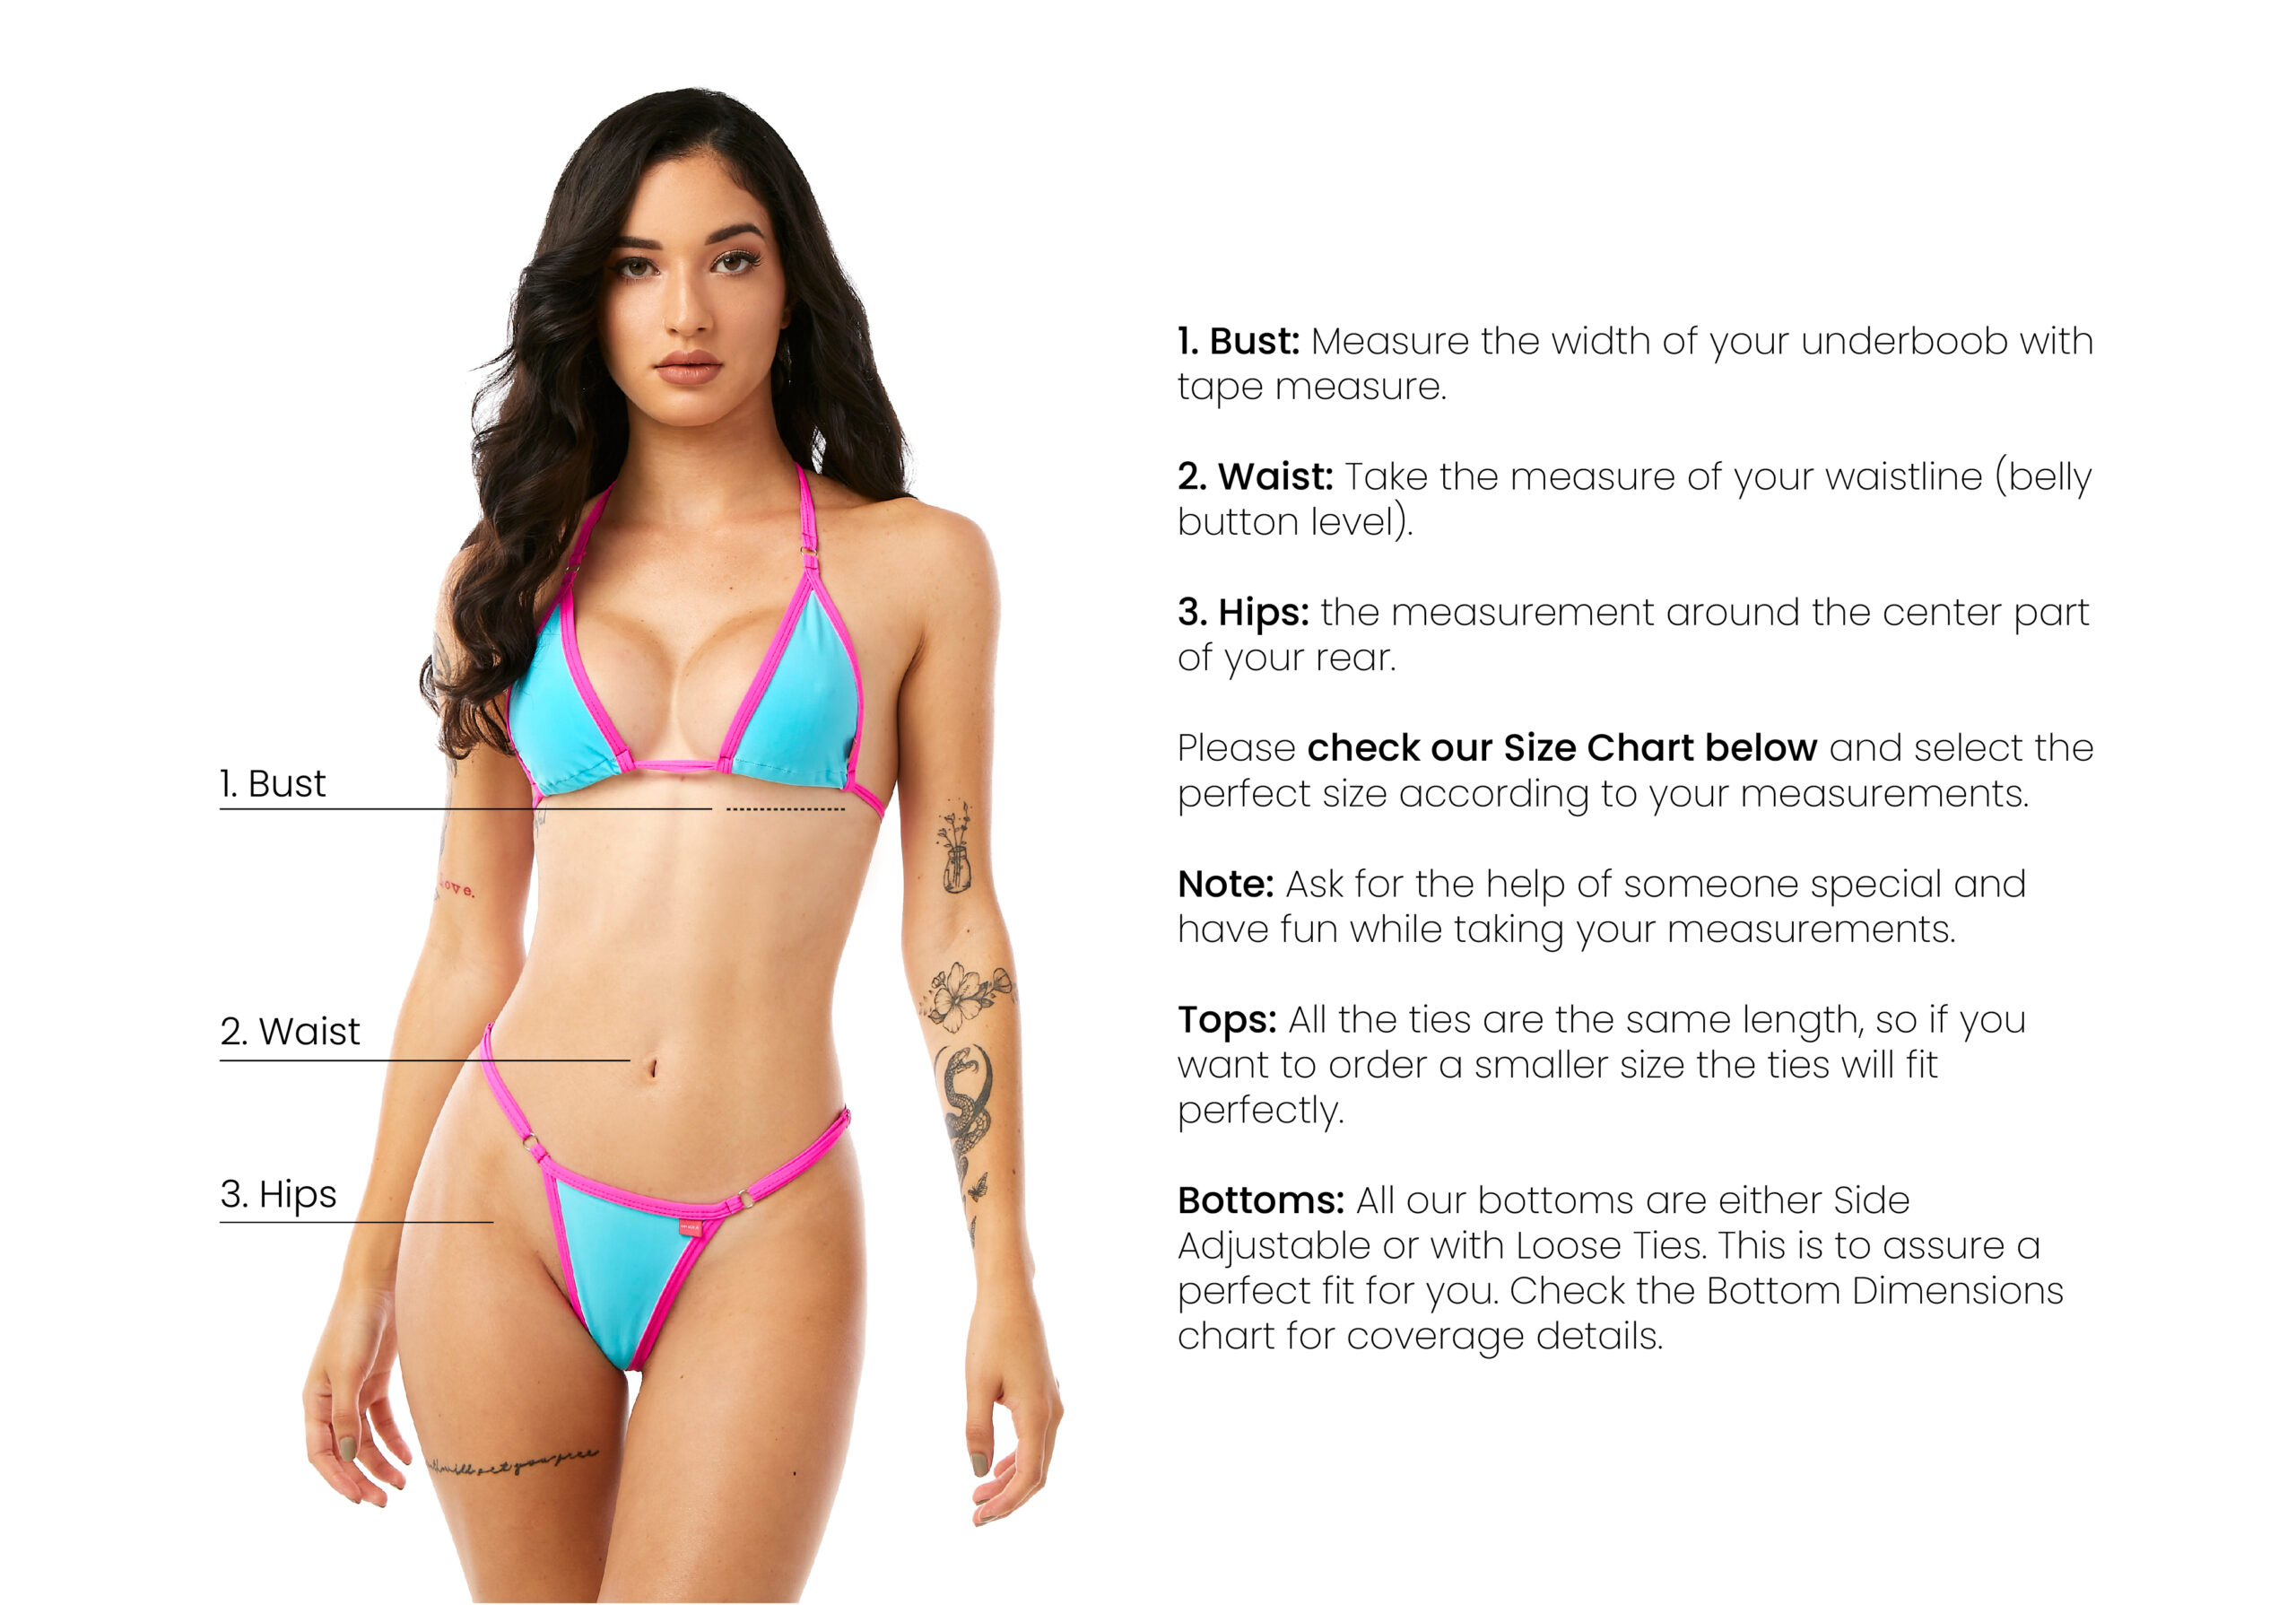 OH LOLA SWIMWEAR: Take your measures and select the perfect your size!